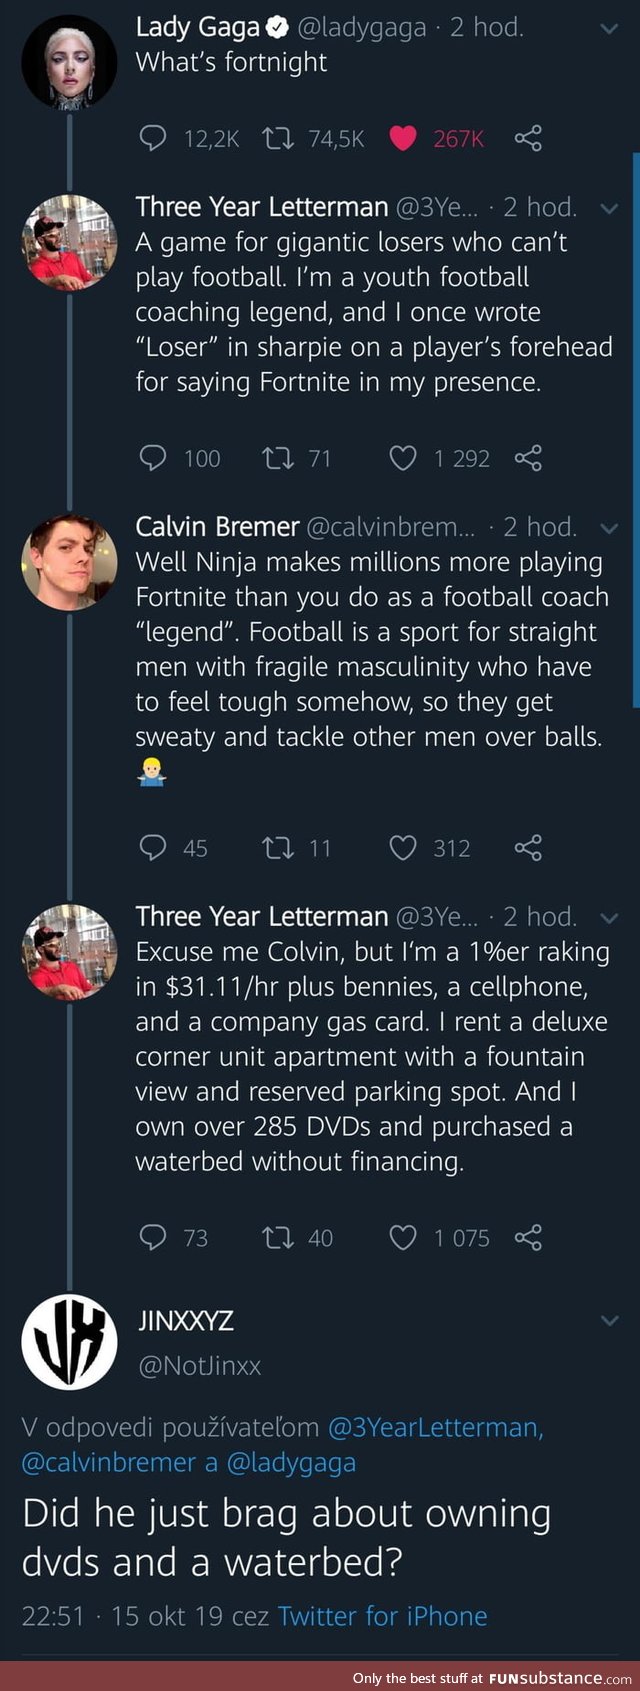 Bragging about owning a waterbed without financing and writing LOSER on his players